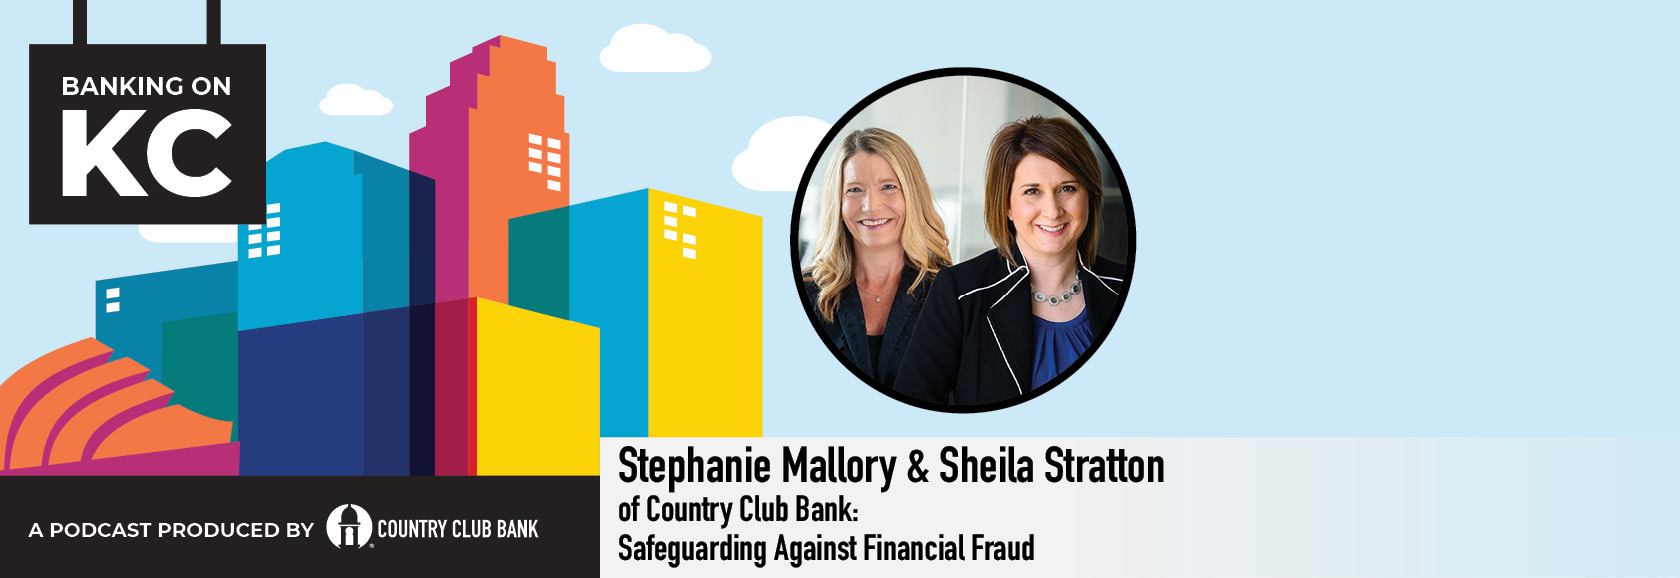 Banking on KC – Stephanie Mallory and Sheila Stratton